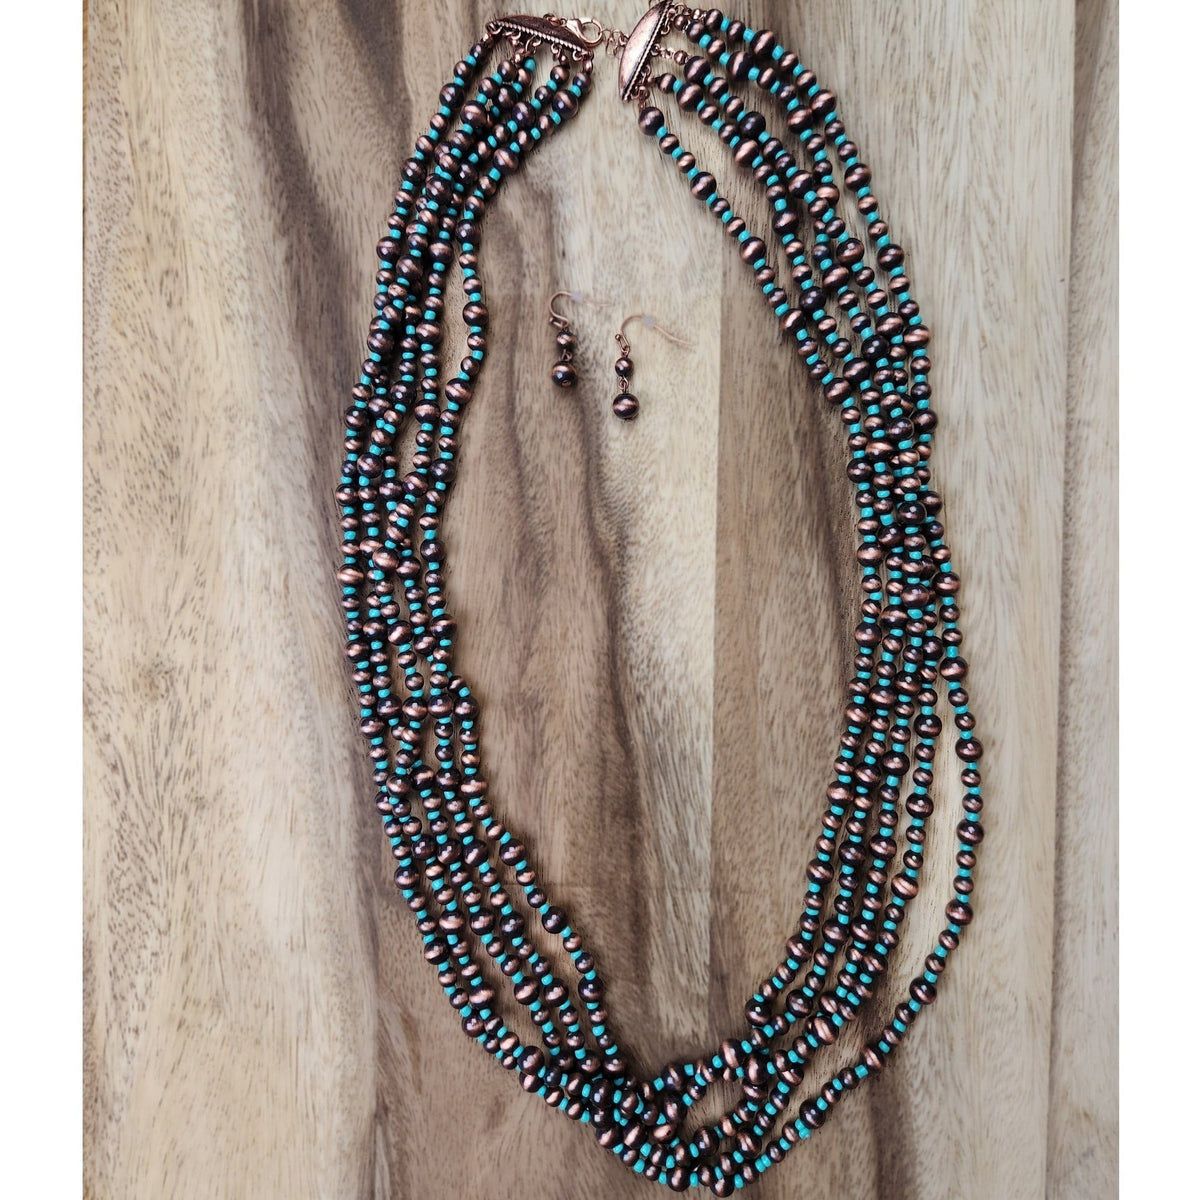 Copperhead Road Layered Beaded Necklace Western Necklace TheFringeCultureCollective